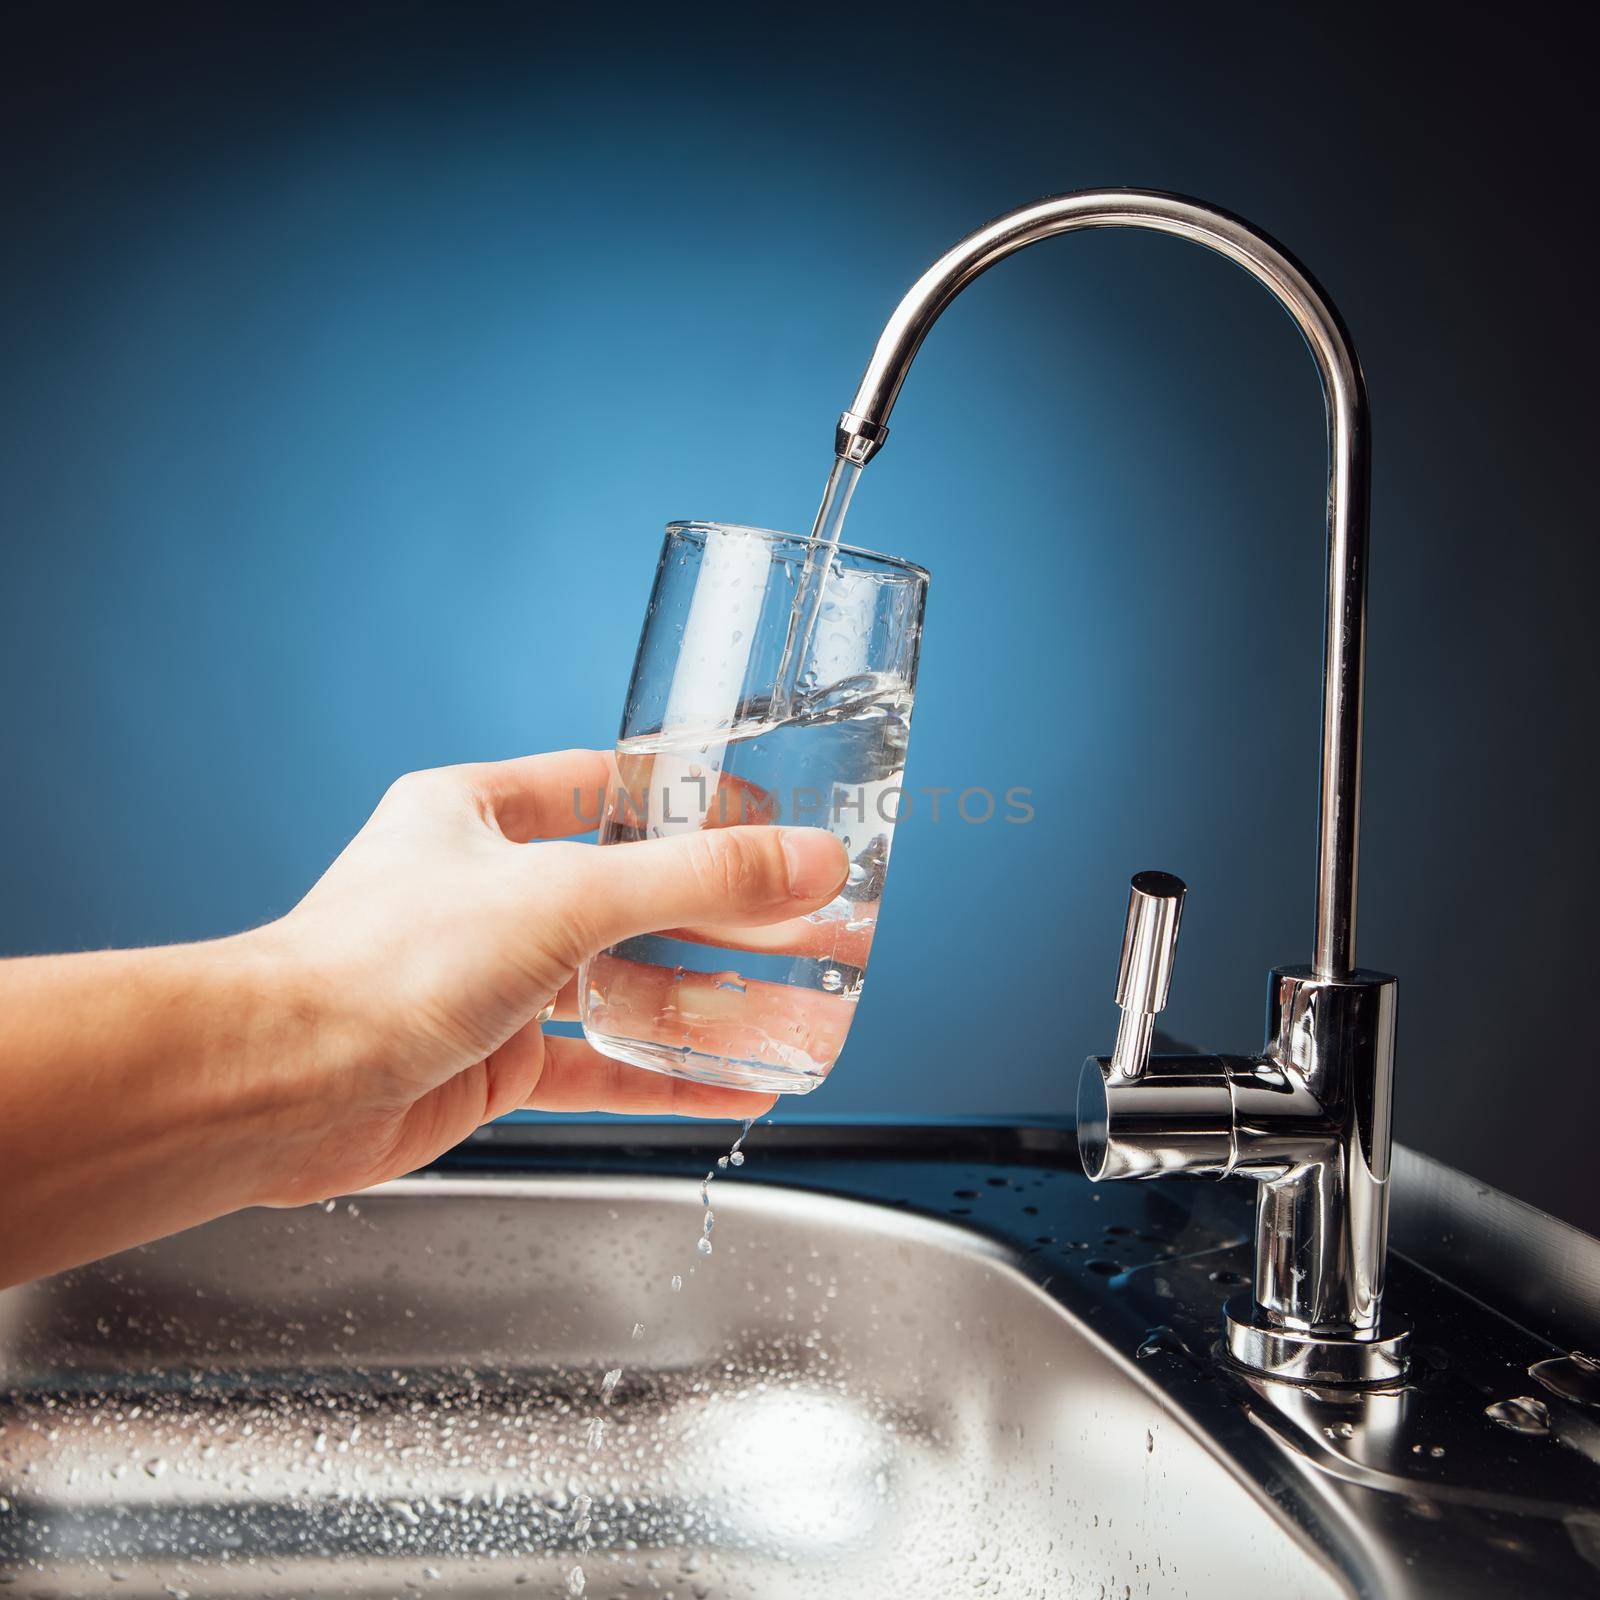 hand pouring a glass of water from filter tap, blue background